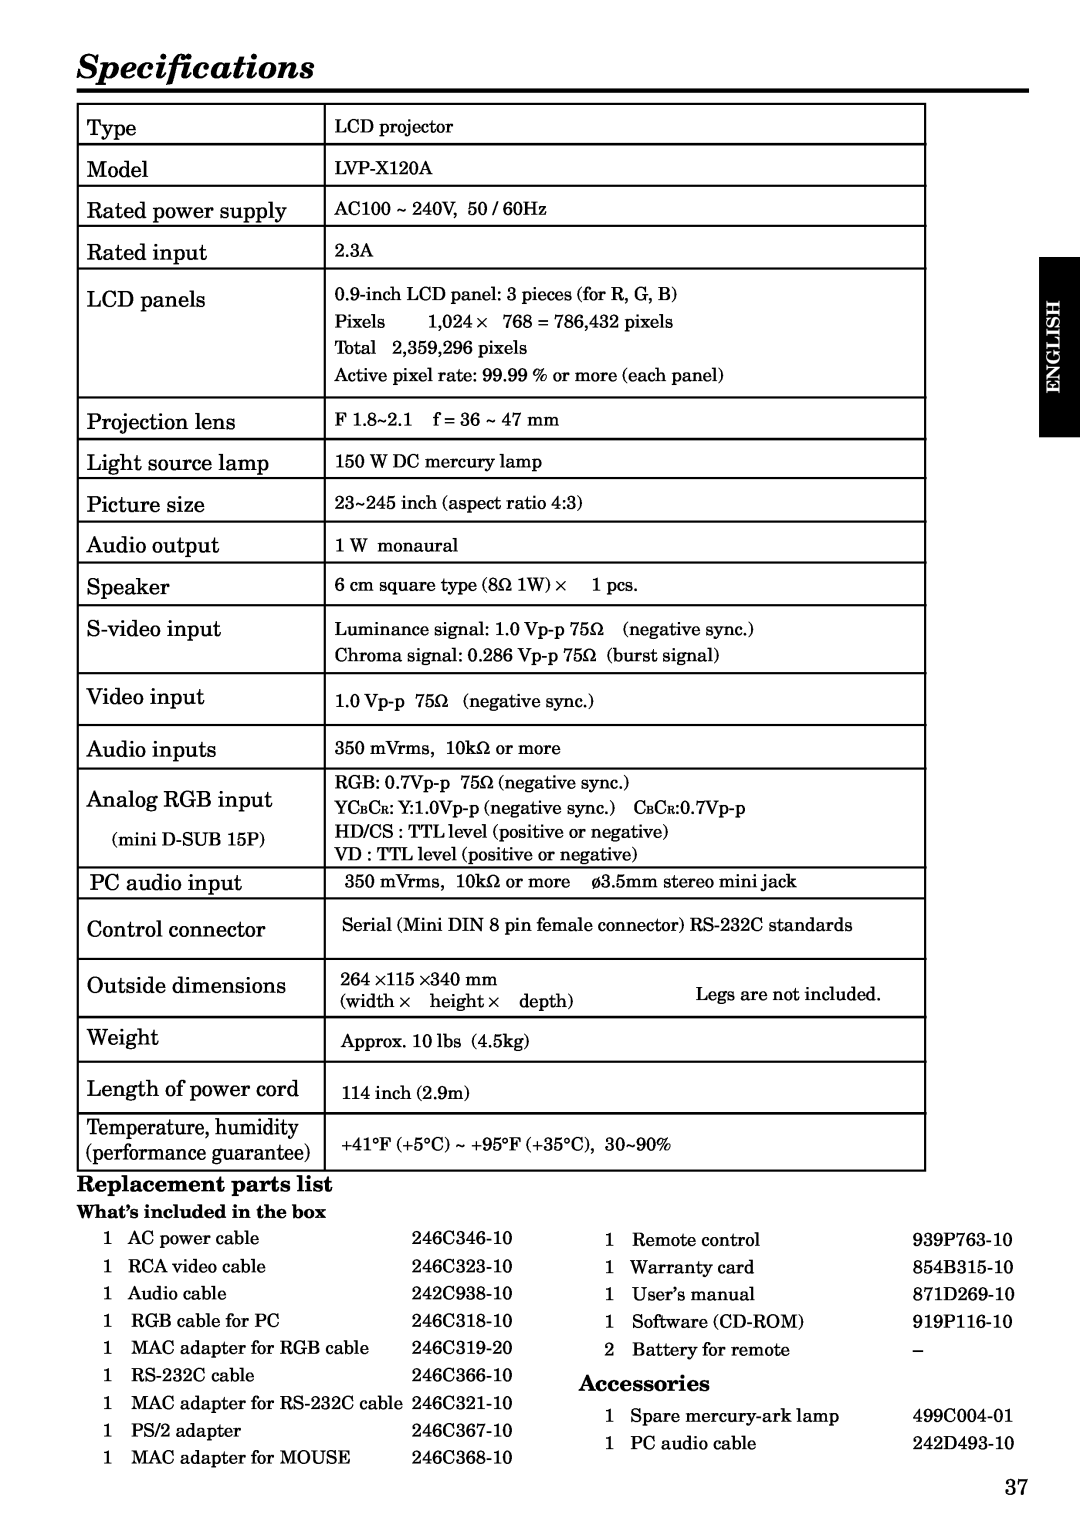 Mitsubishi Electronics LVP-X120A user manual Specifications, Replacement parts list, Accessories 